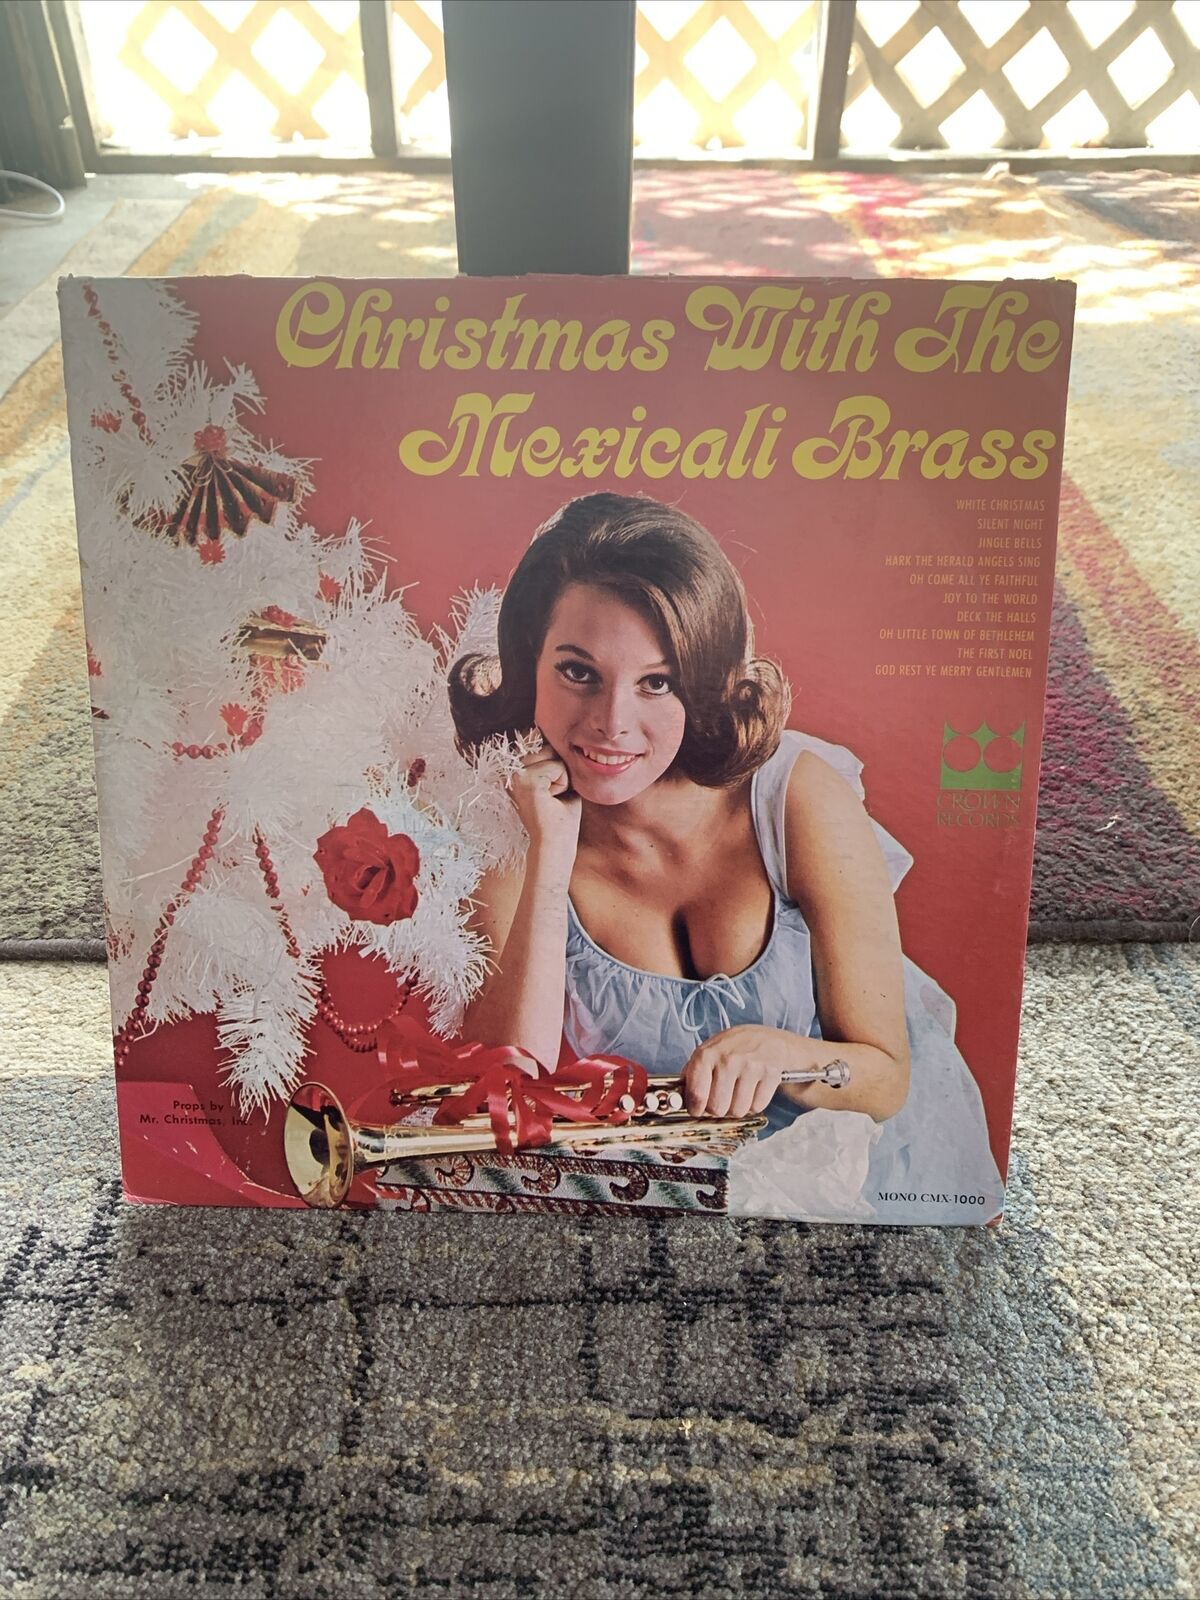 Christmas With The Mexicali Brass VINYL LP ALBUM CROWN RECORDS JINGLE BELLS